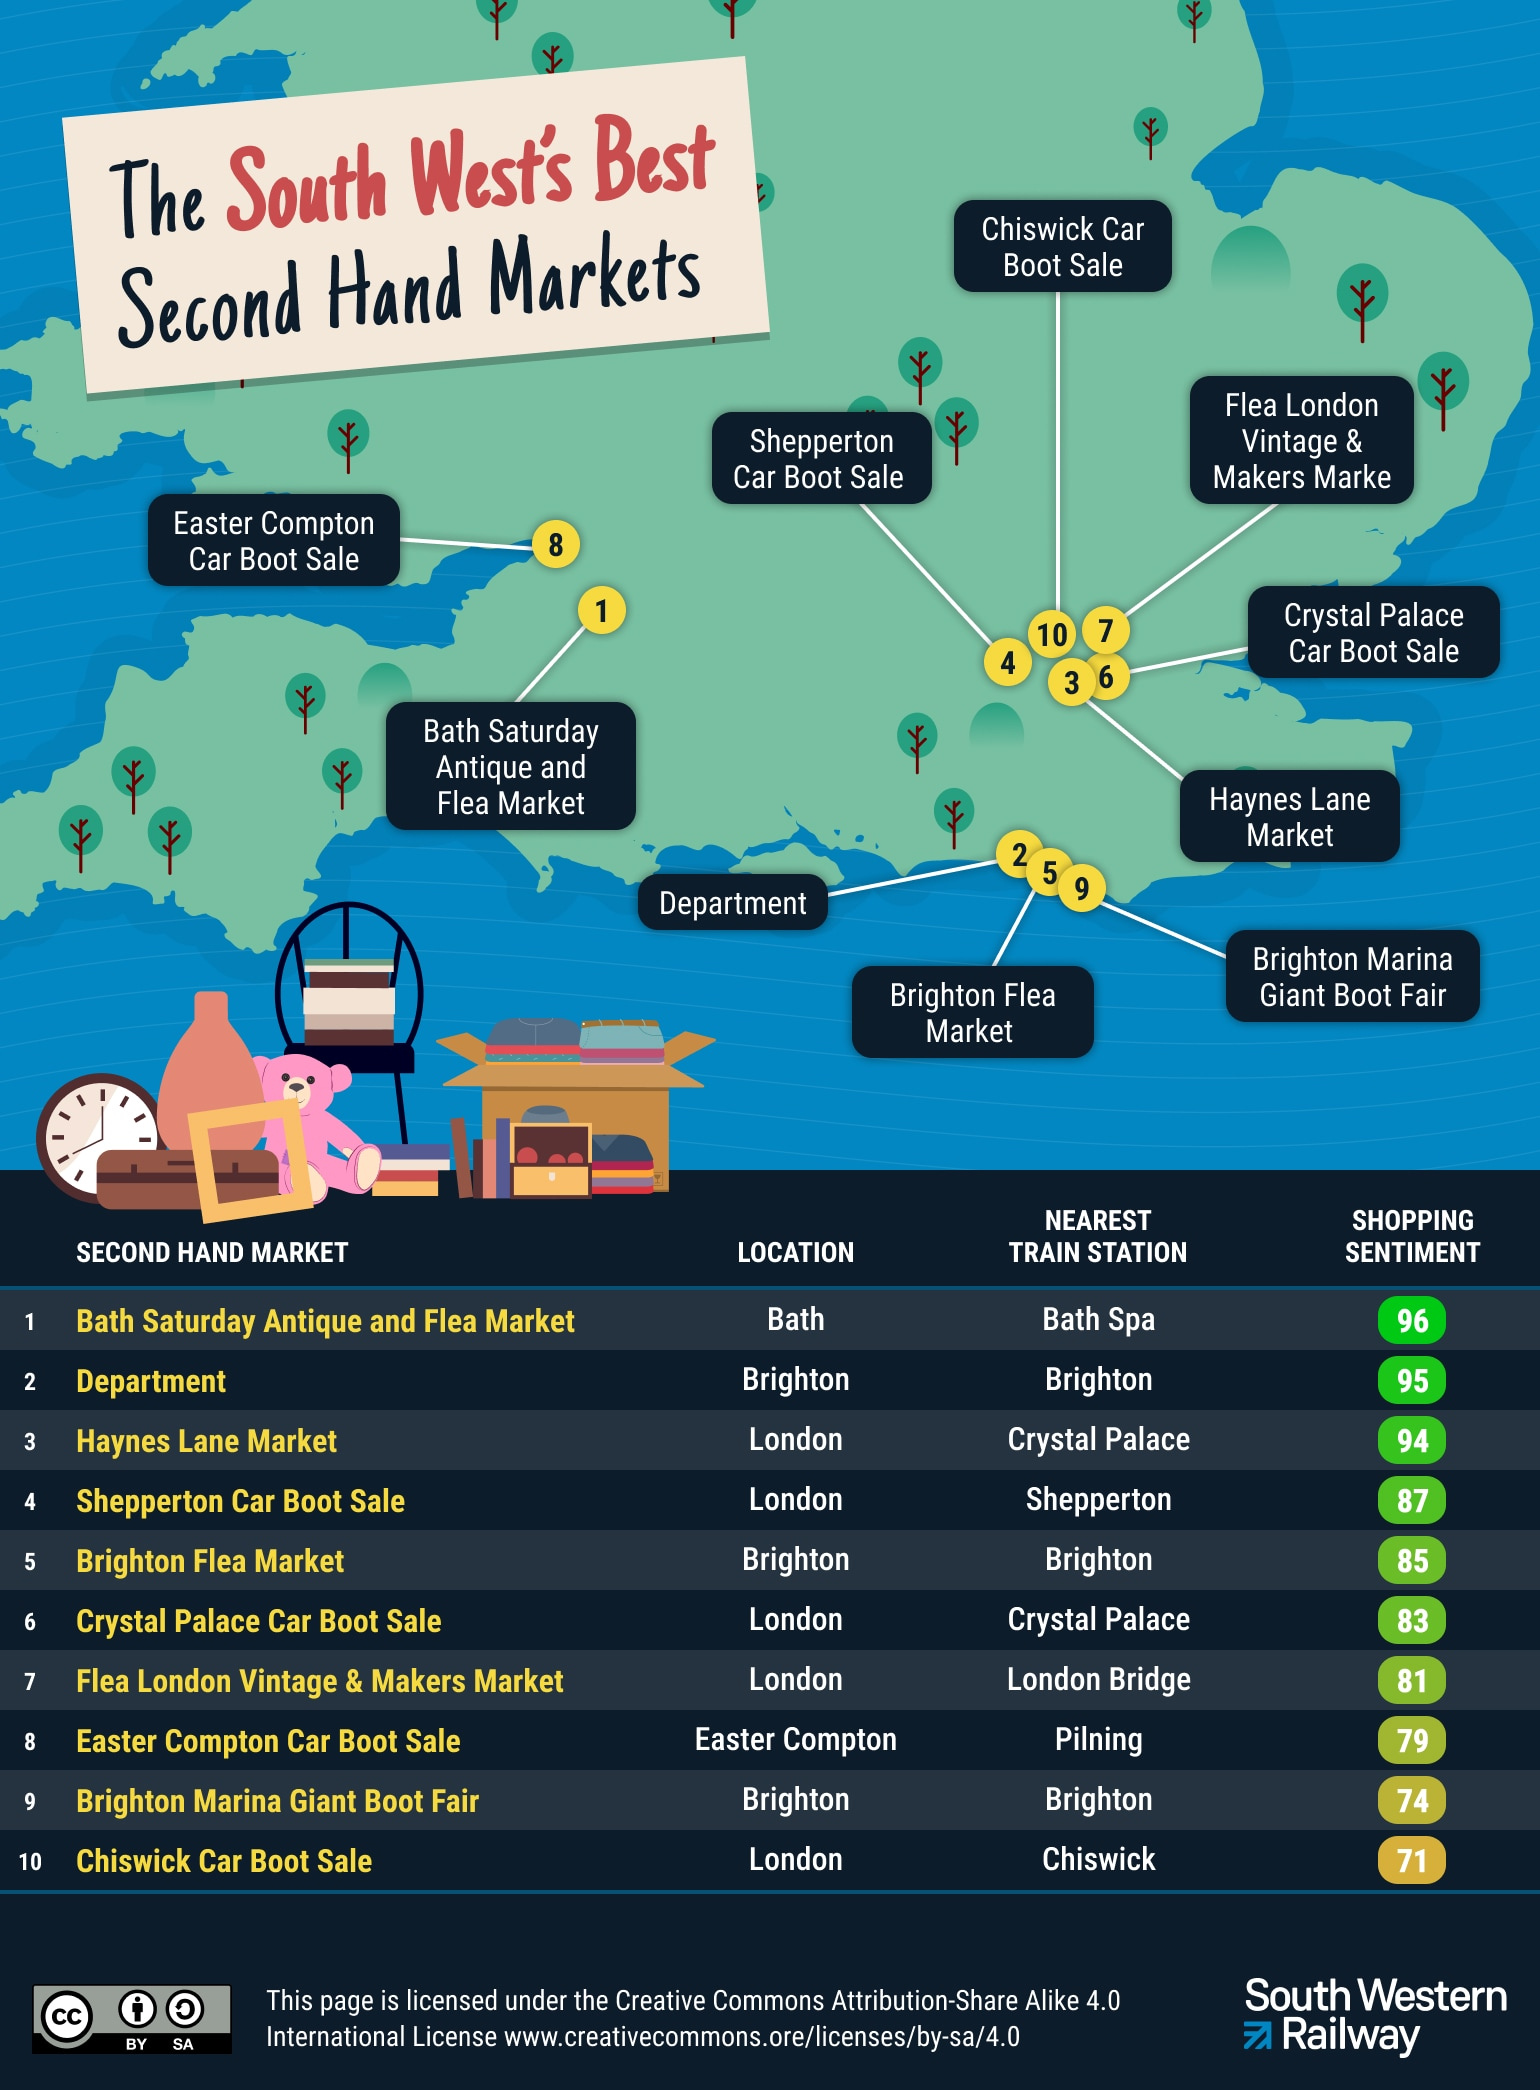 The South West's best second hand markets map